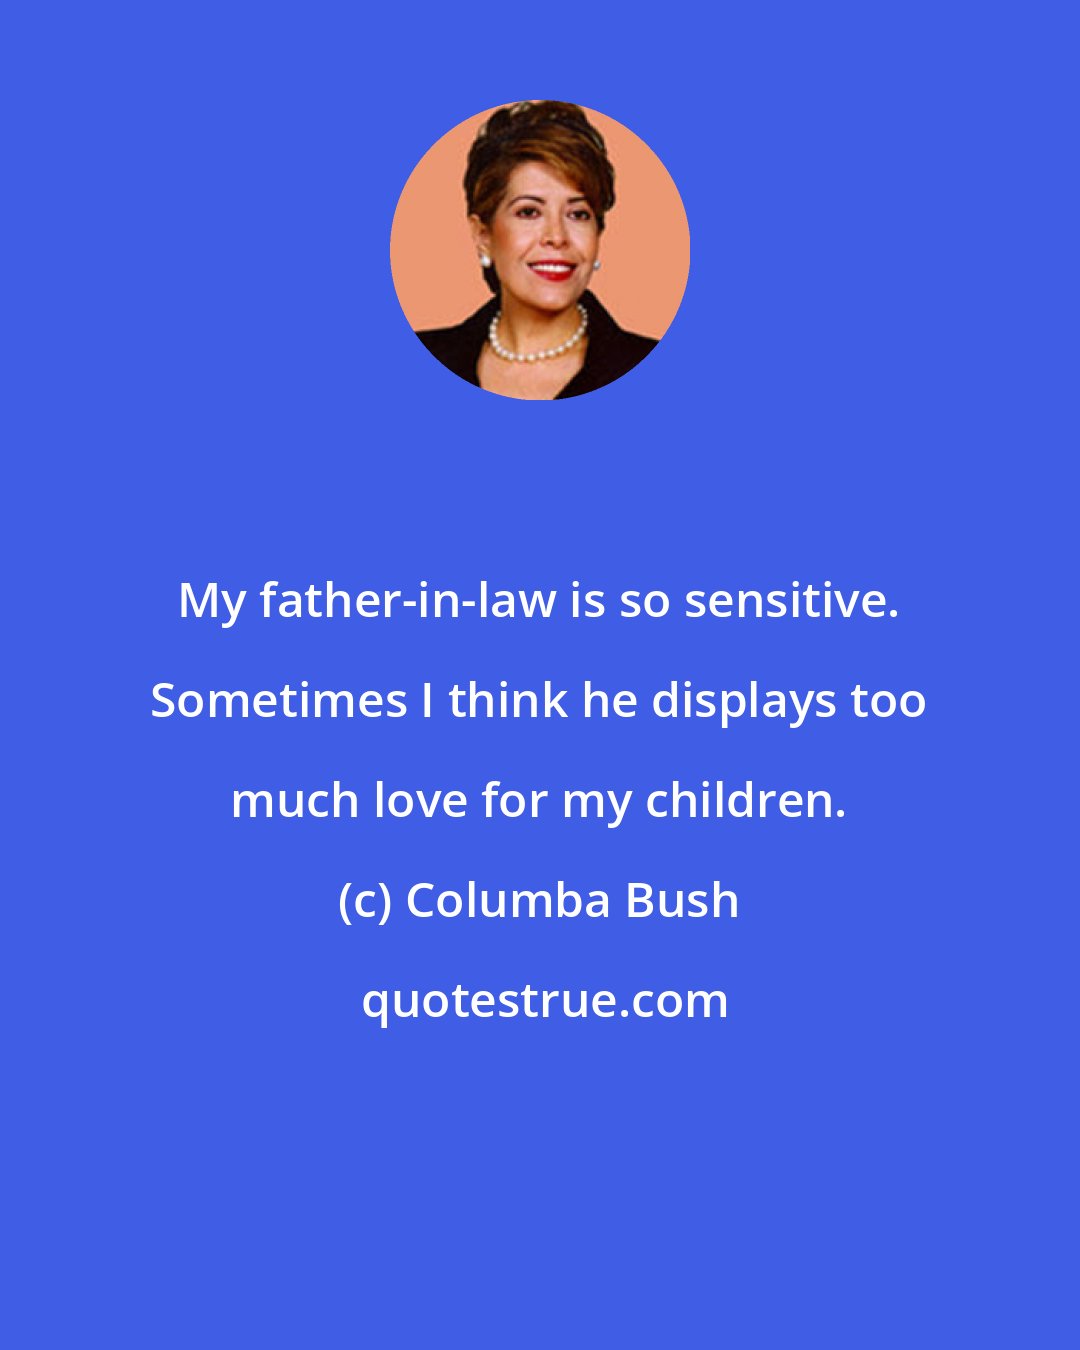 Columba Bush: My father-in-law is so sensitive. Sometimes I think he displays too much love for my children.